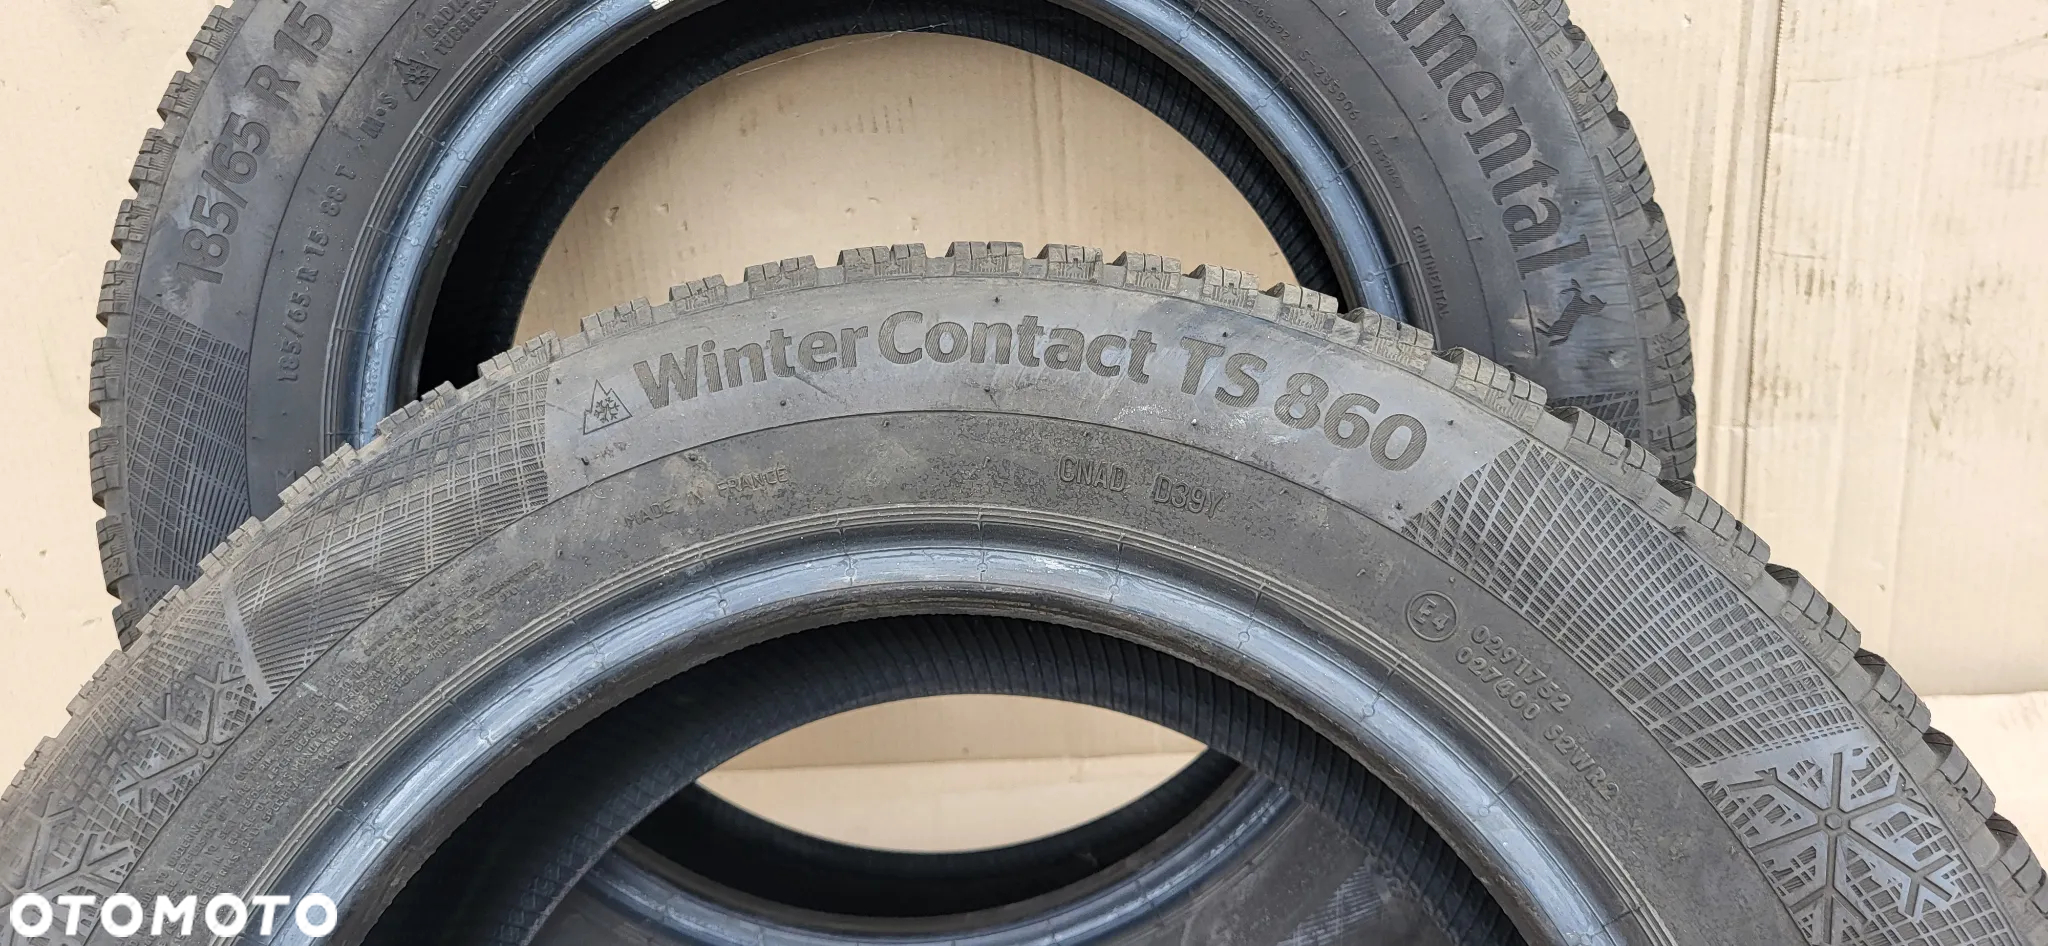 CONTINENTAL WINTER CONTACT TS860 185.66.15 - 8